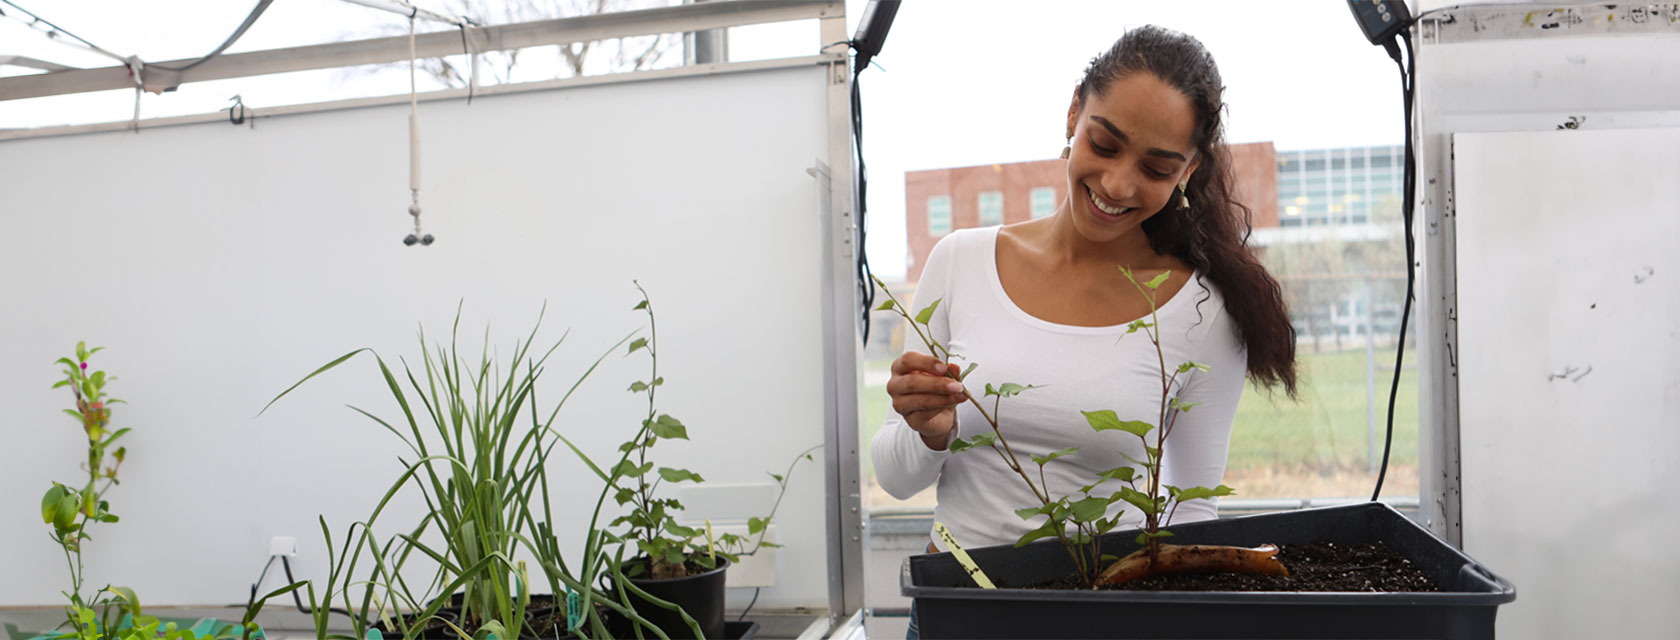 U of G OAC crop-science student holding a plant